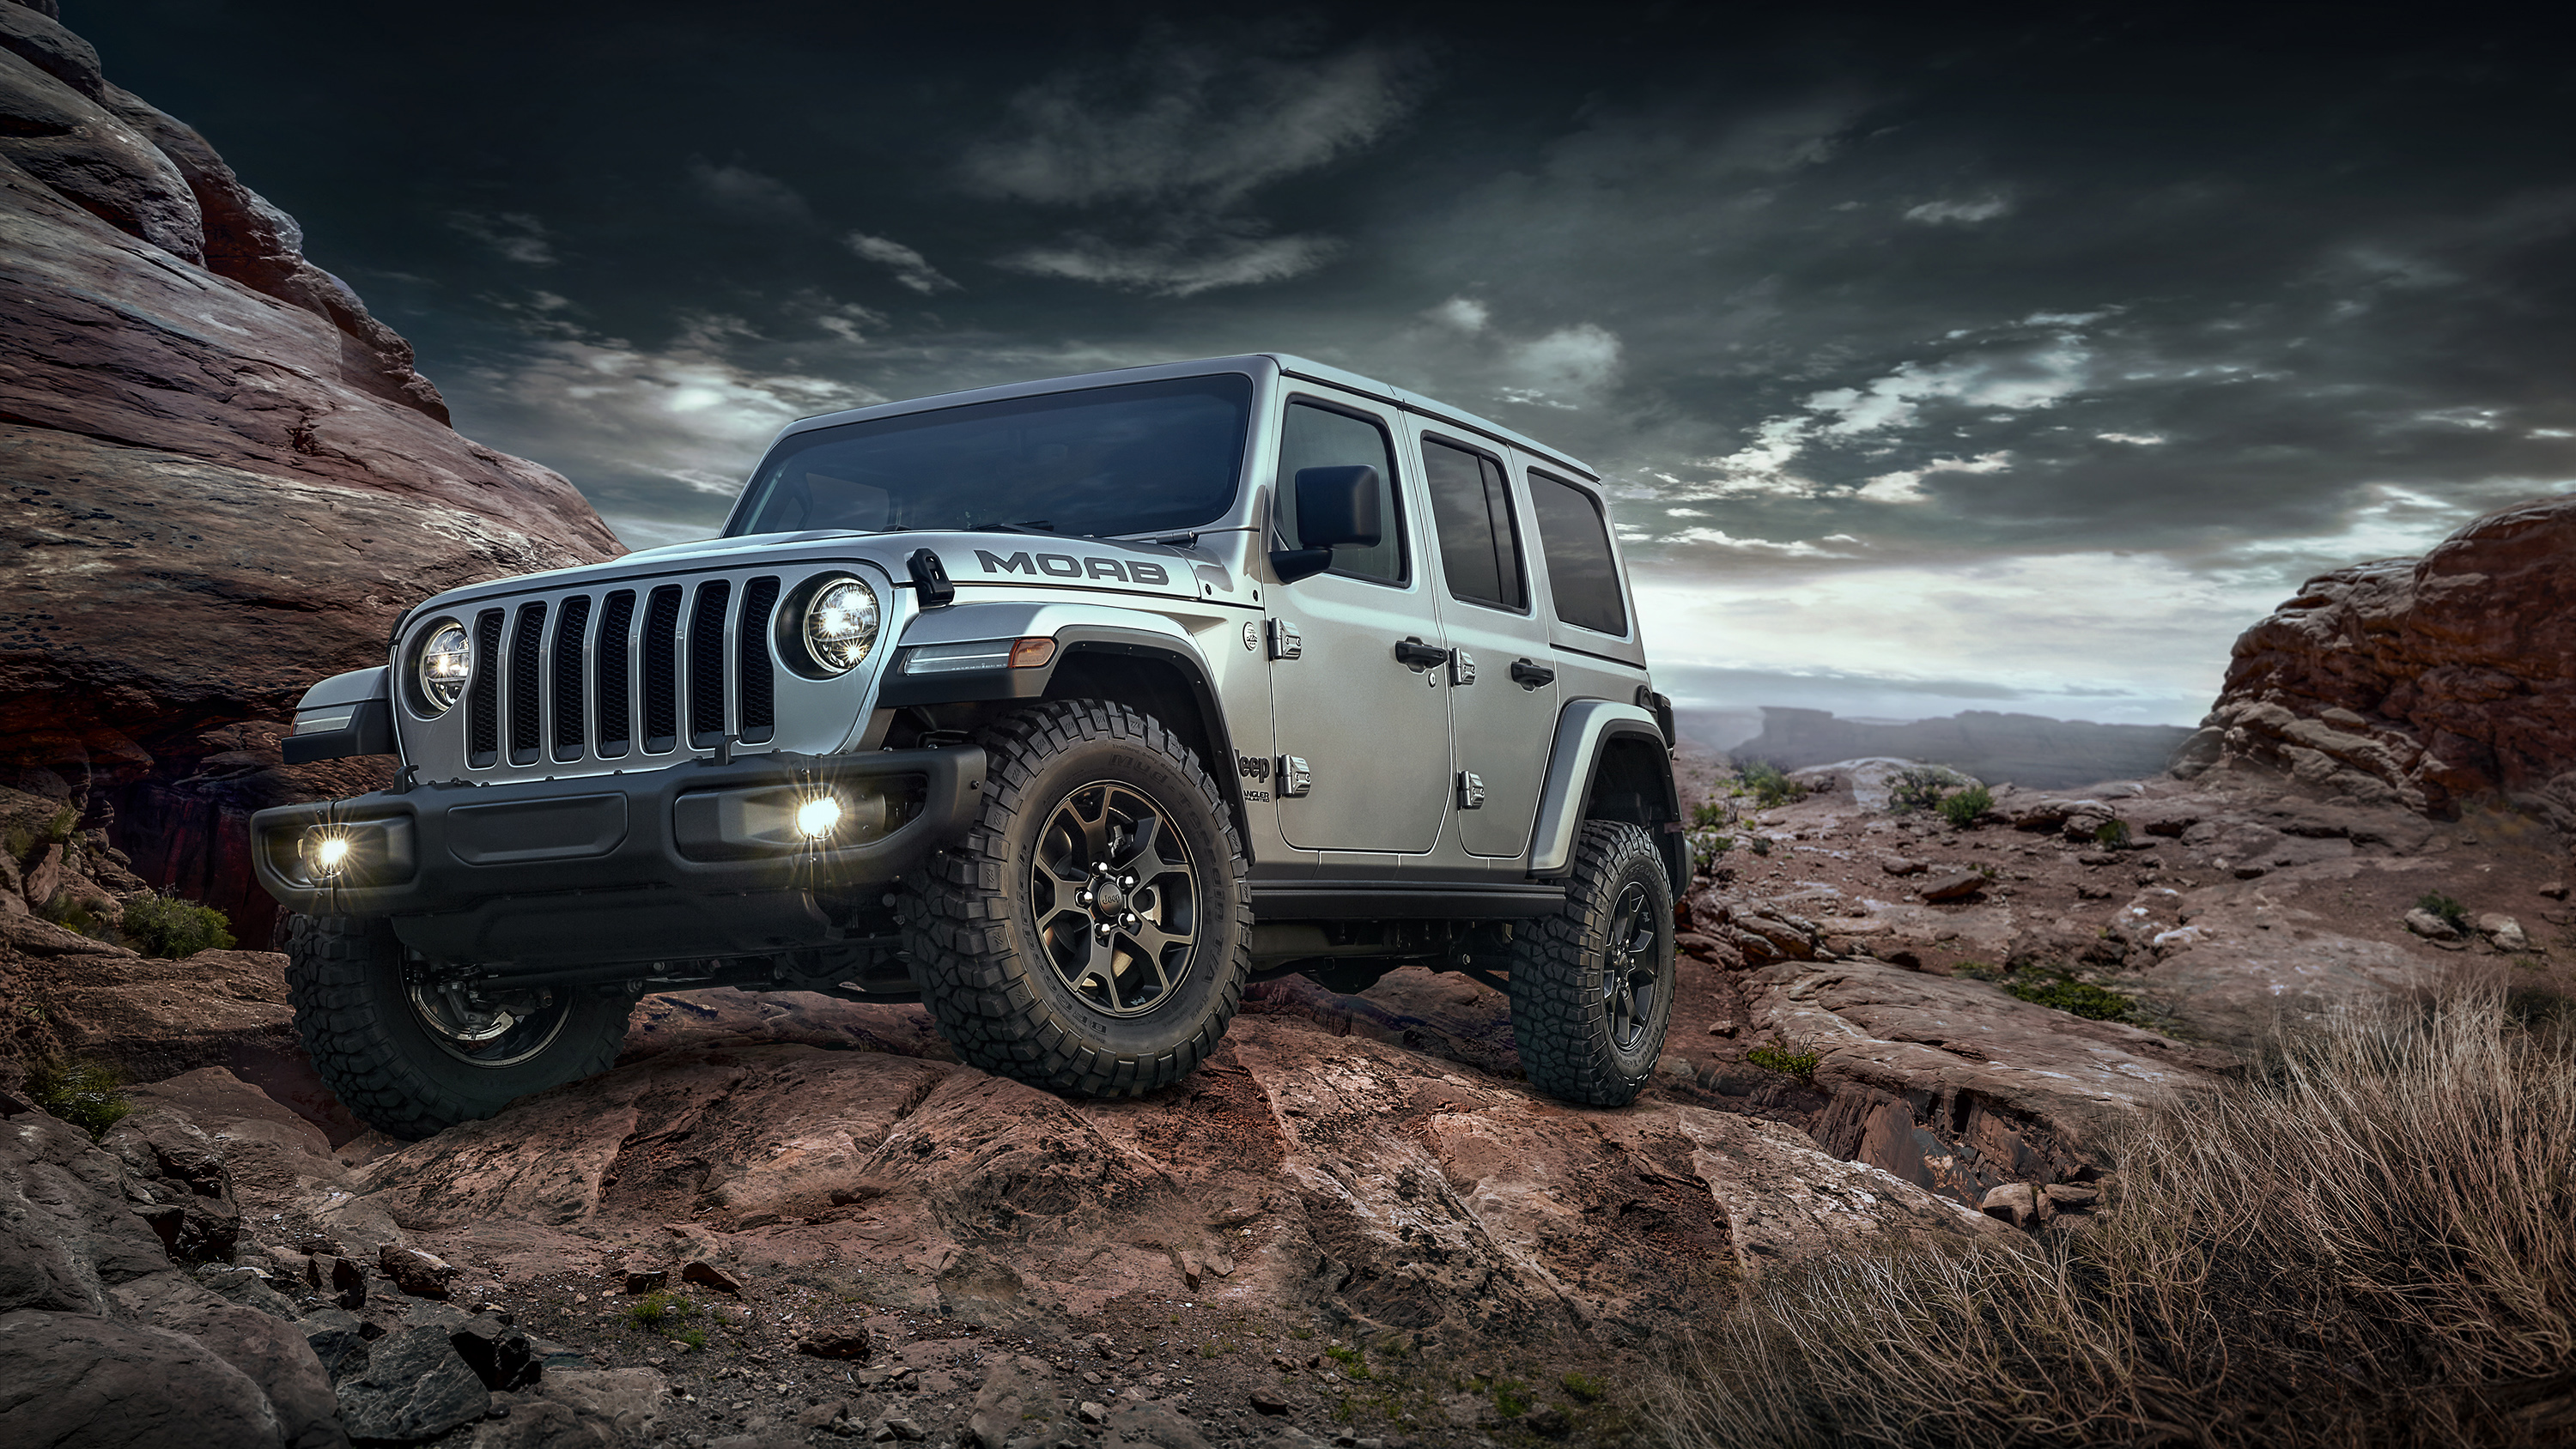 18 Jeep Wrangler Unlimited Moab Edition Wallpaper Hd Car Wallpapers Id